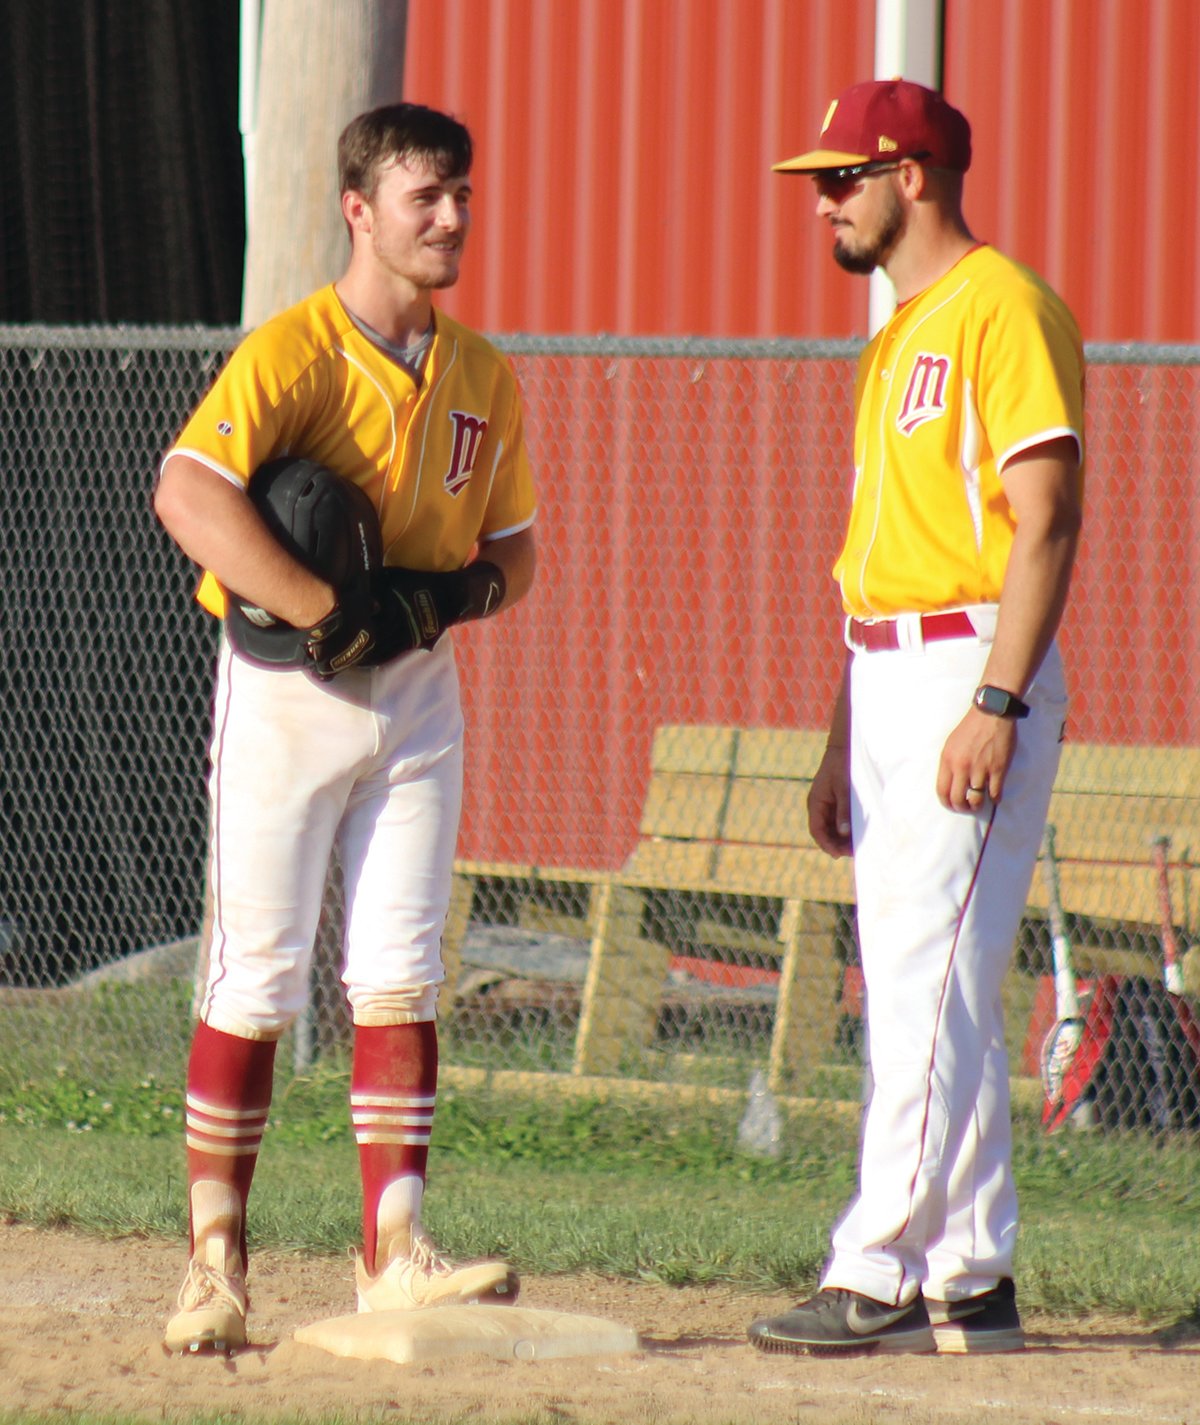 Mansfield’s Trevor Williams reaches base in the Lions’ win over Norwood last week. First base coach Drew Ames visits with his new baserunner.